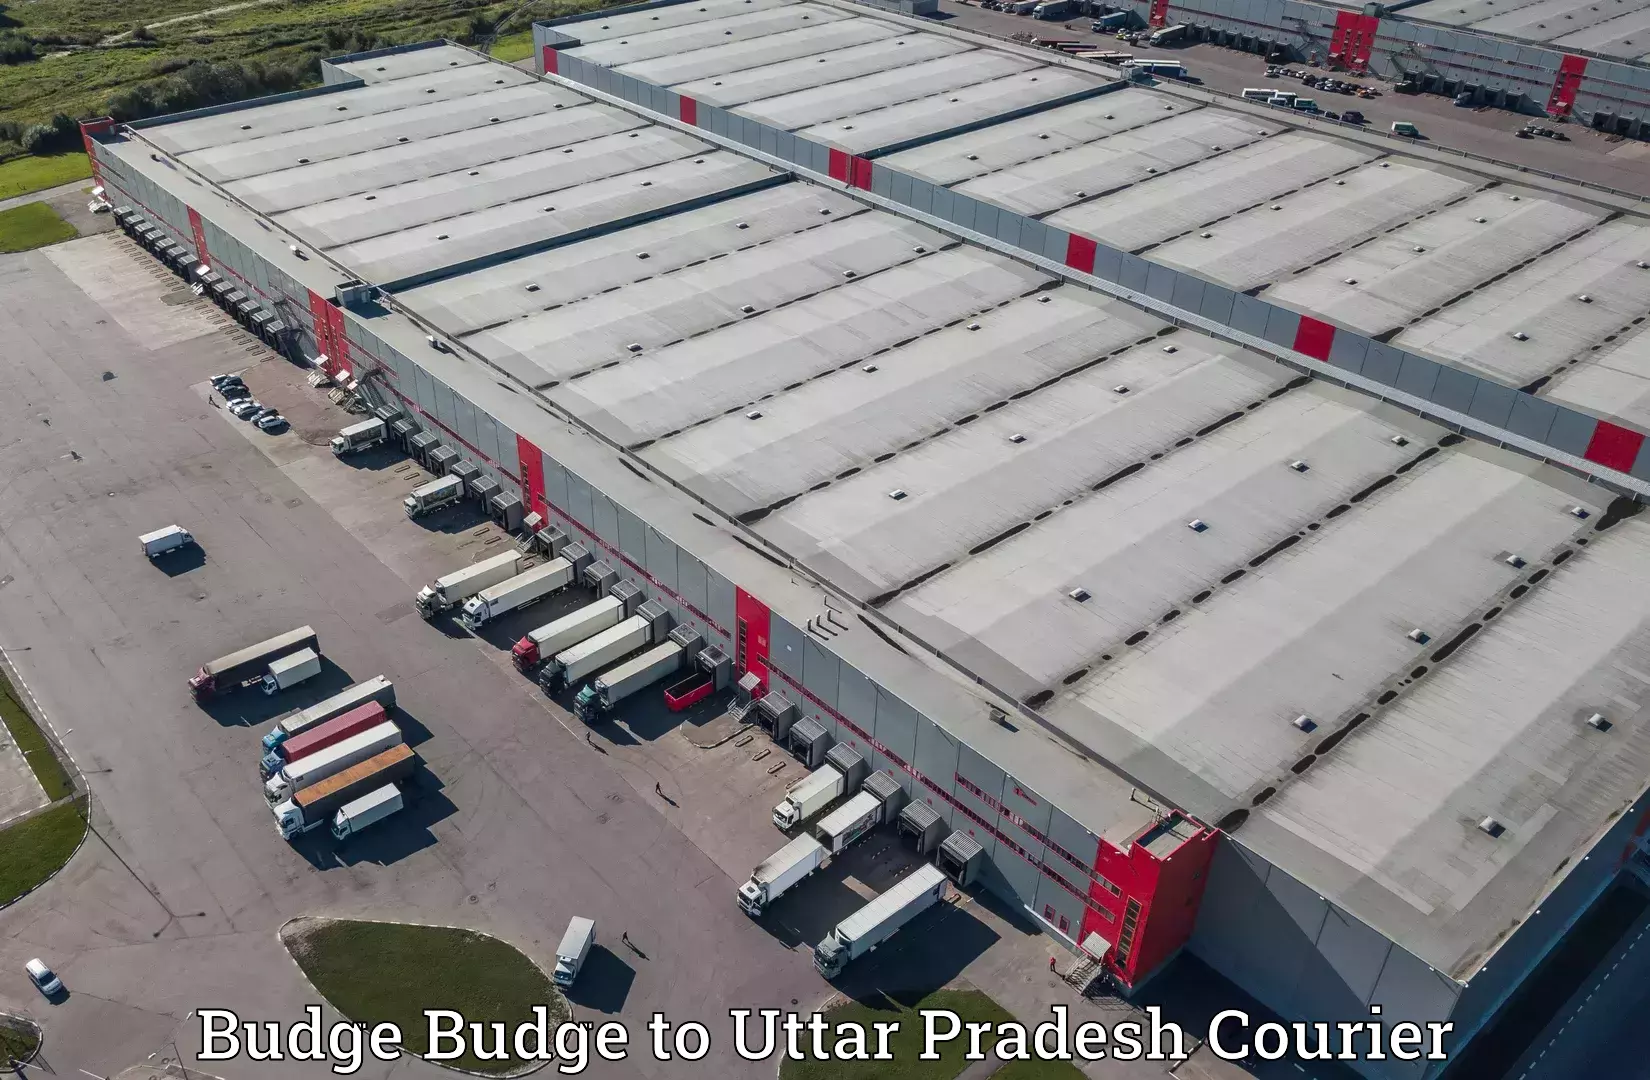 Cross-border shipping Budge Budge to Kanpur